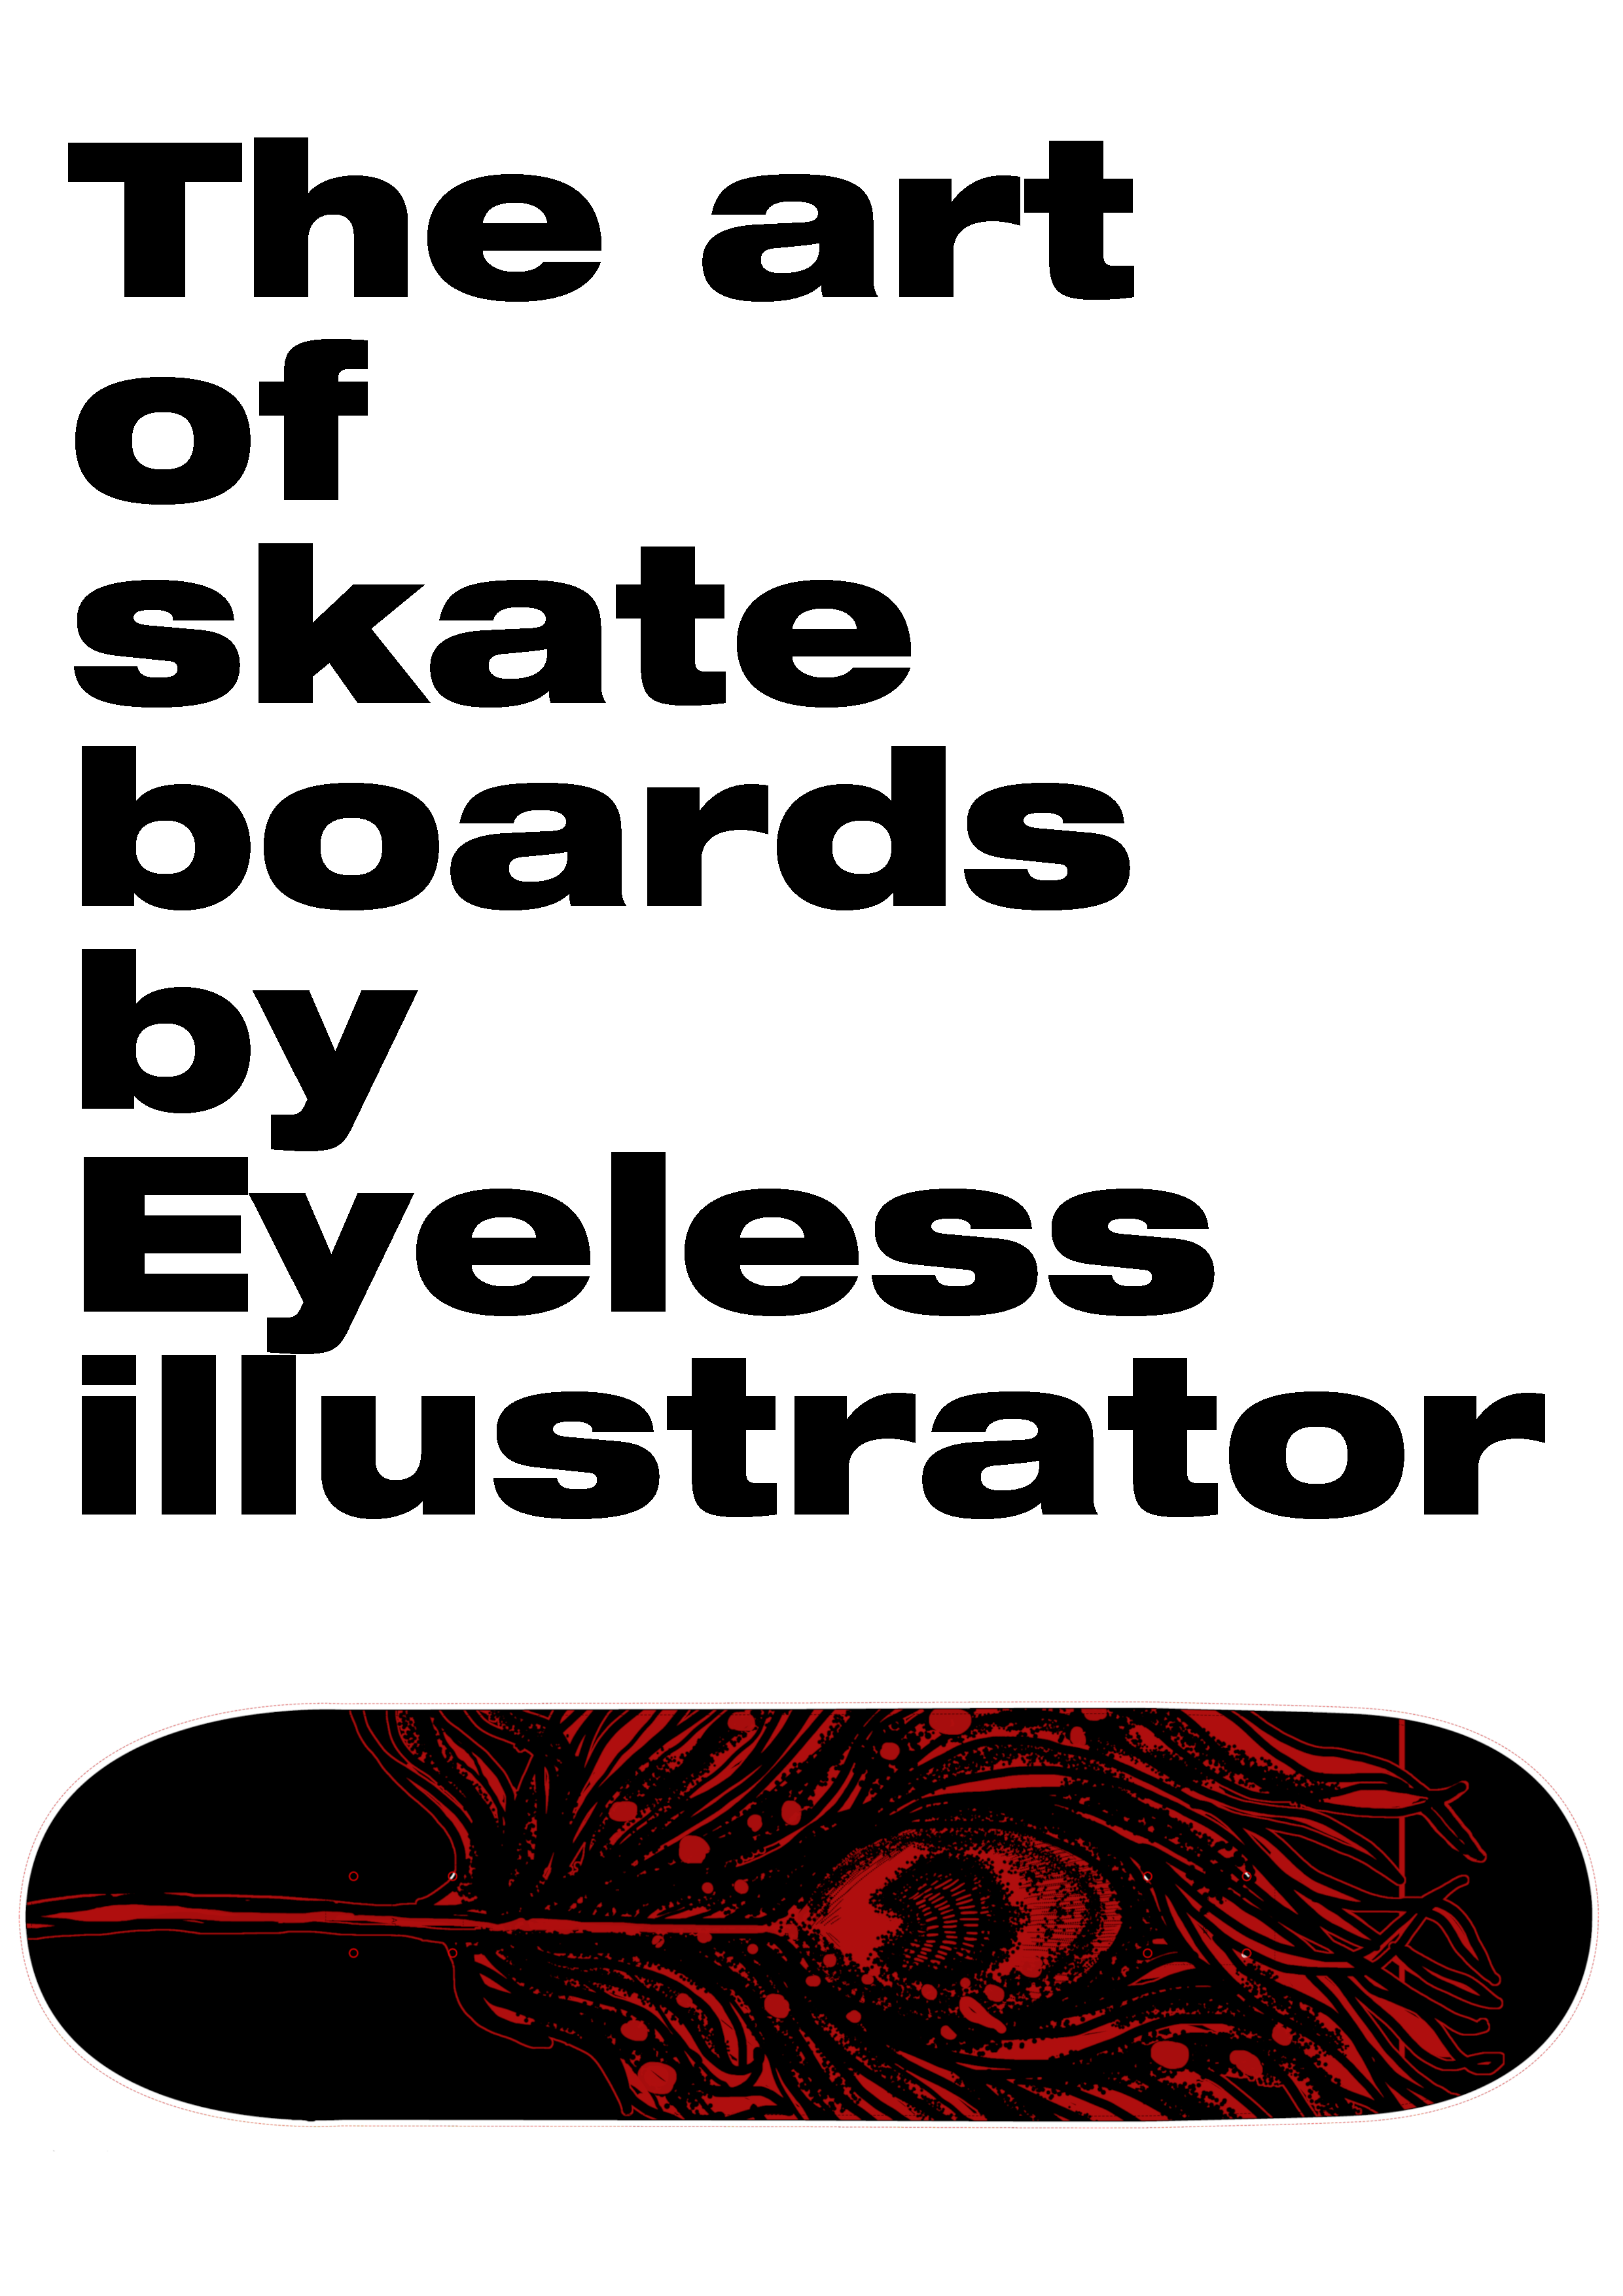 THE ART OF SKATE BOARDS BY EYELESS ILLUSTRATOR rendition image